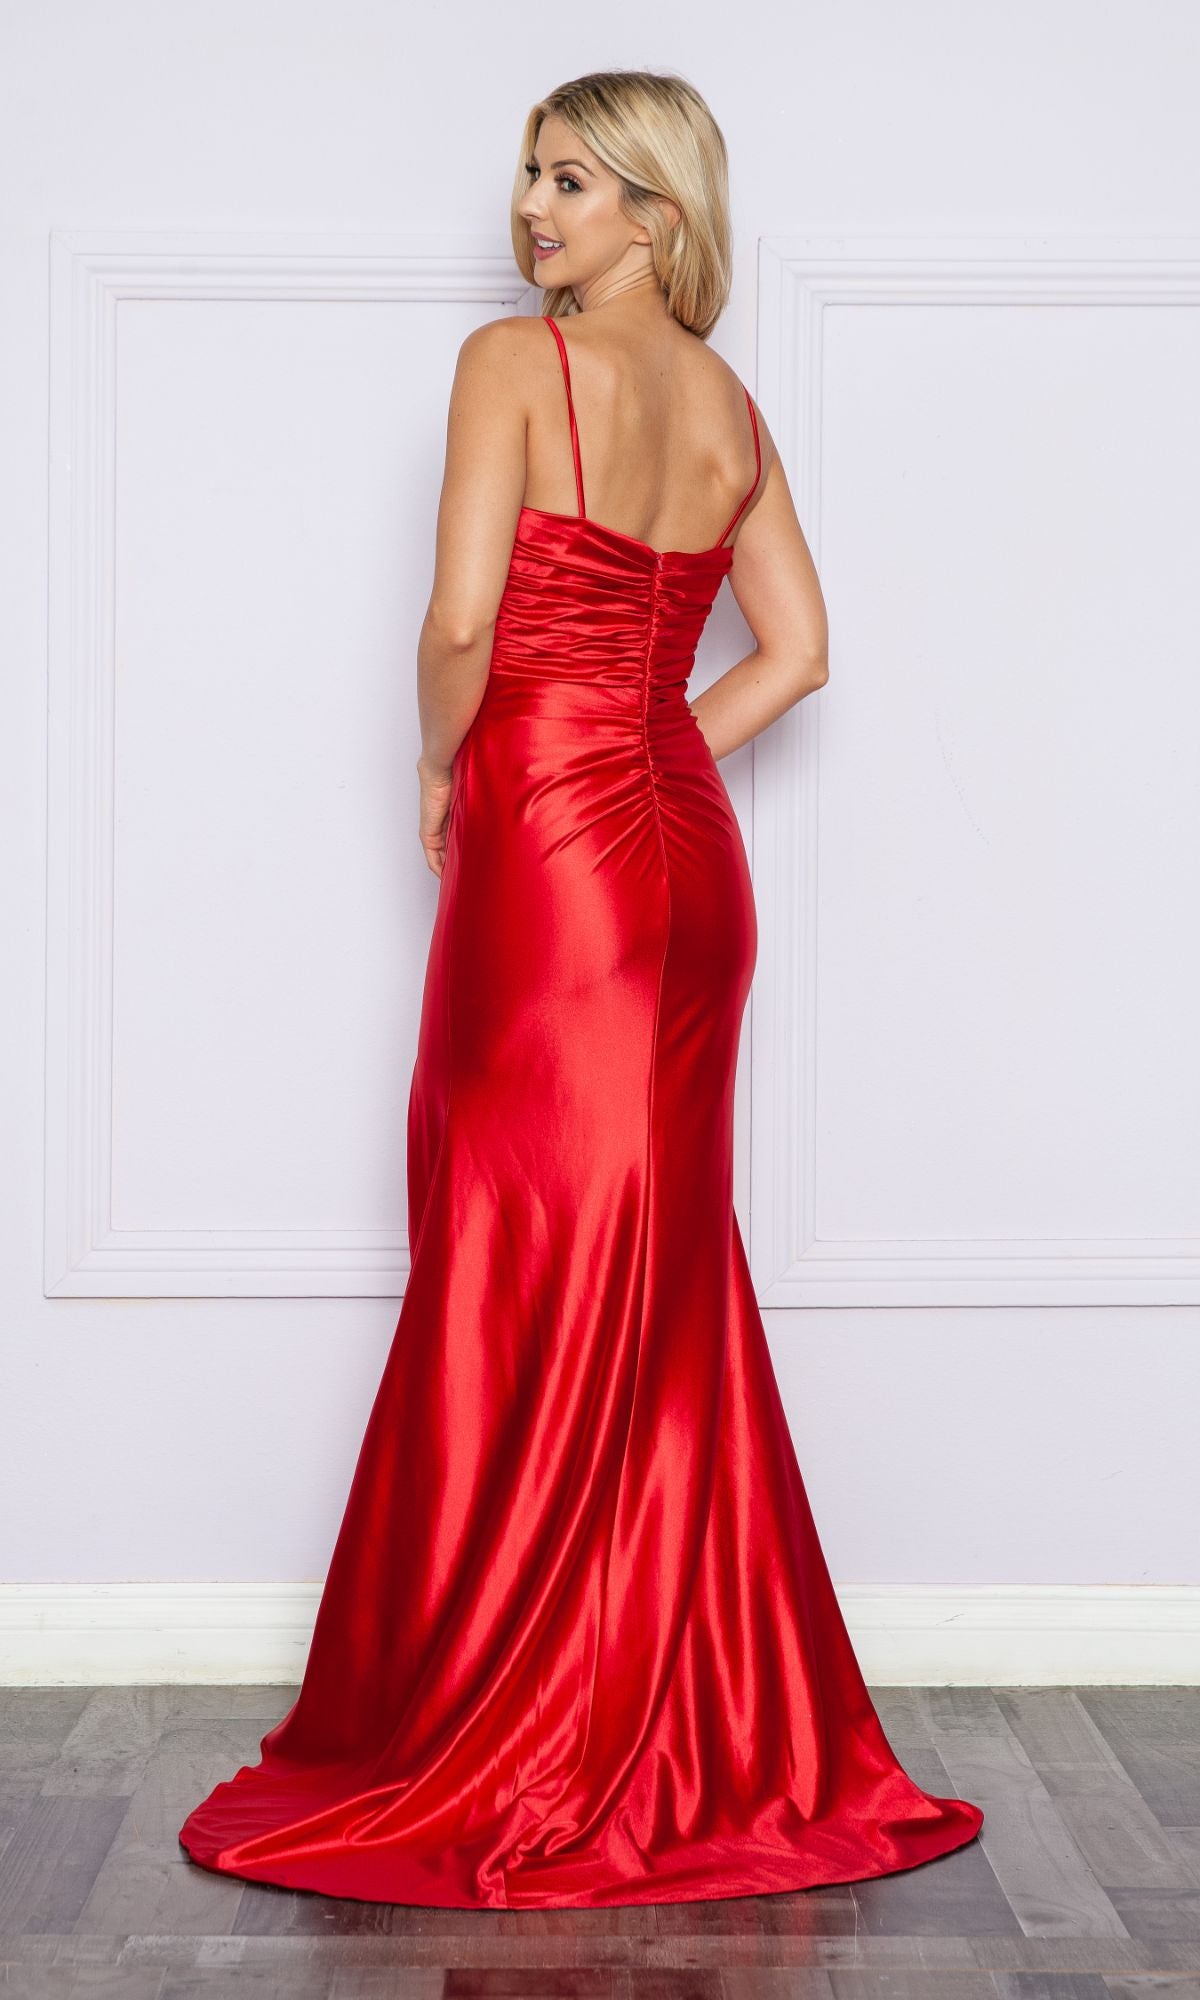 Long Sweetheart Ruched Prom Dress 9254